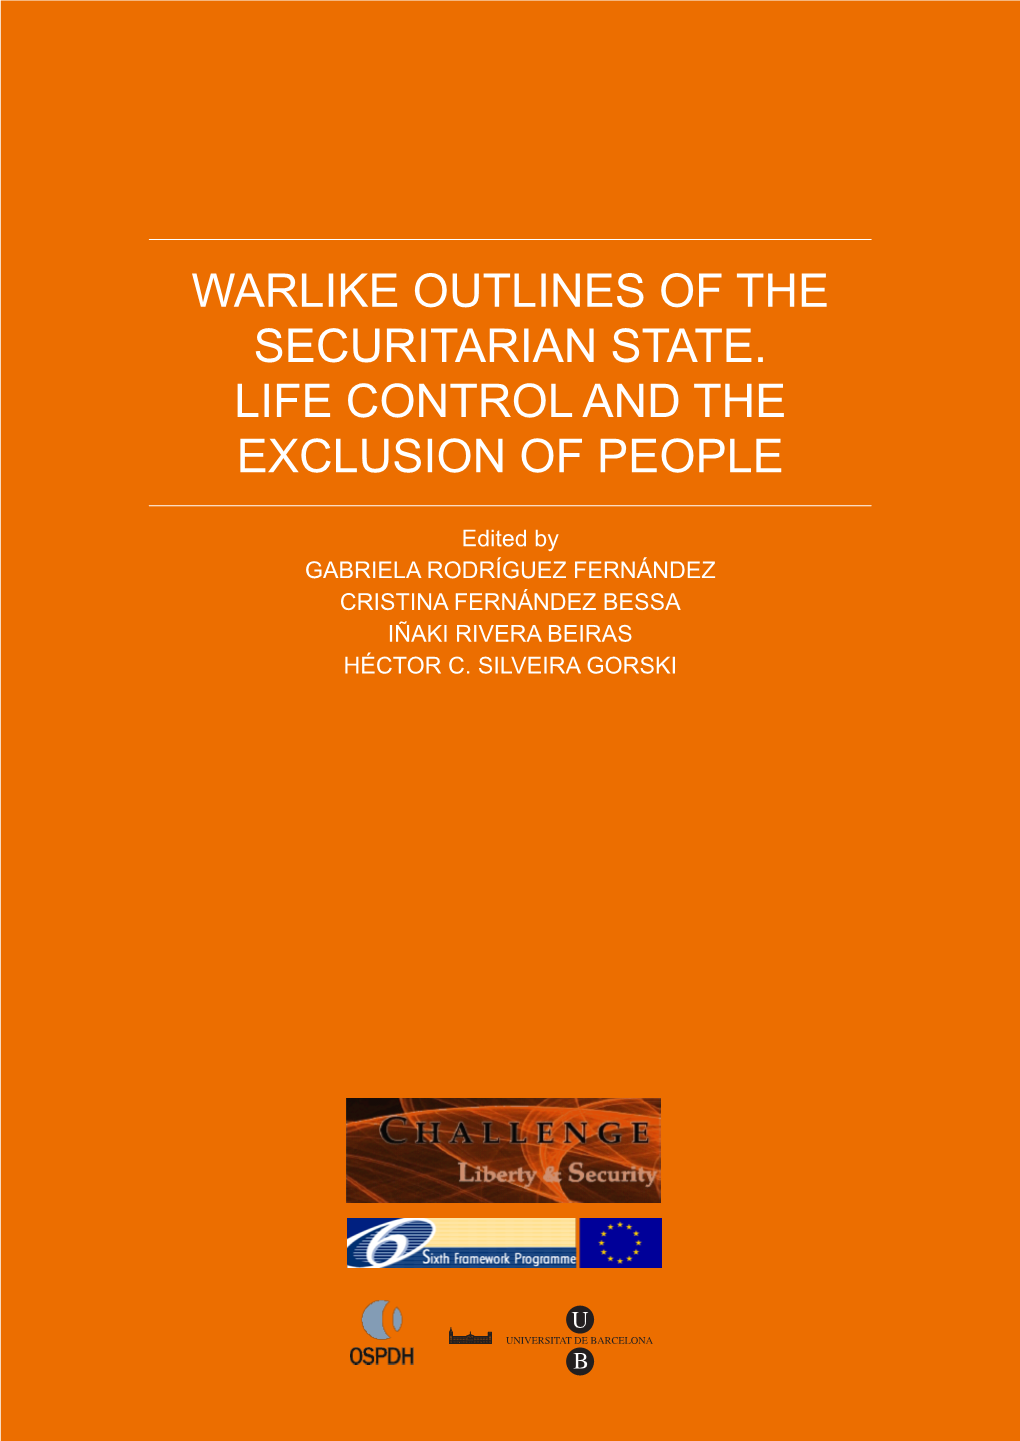 Warlike Outlines of the Securitarian State. Life Control and the Exclusion of People